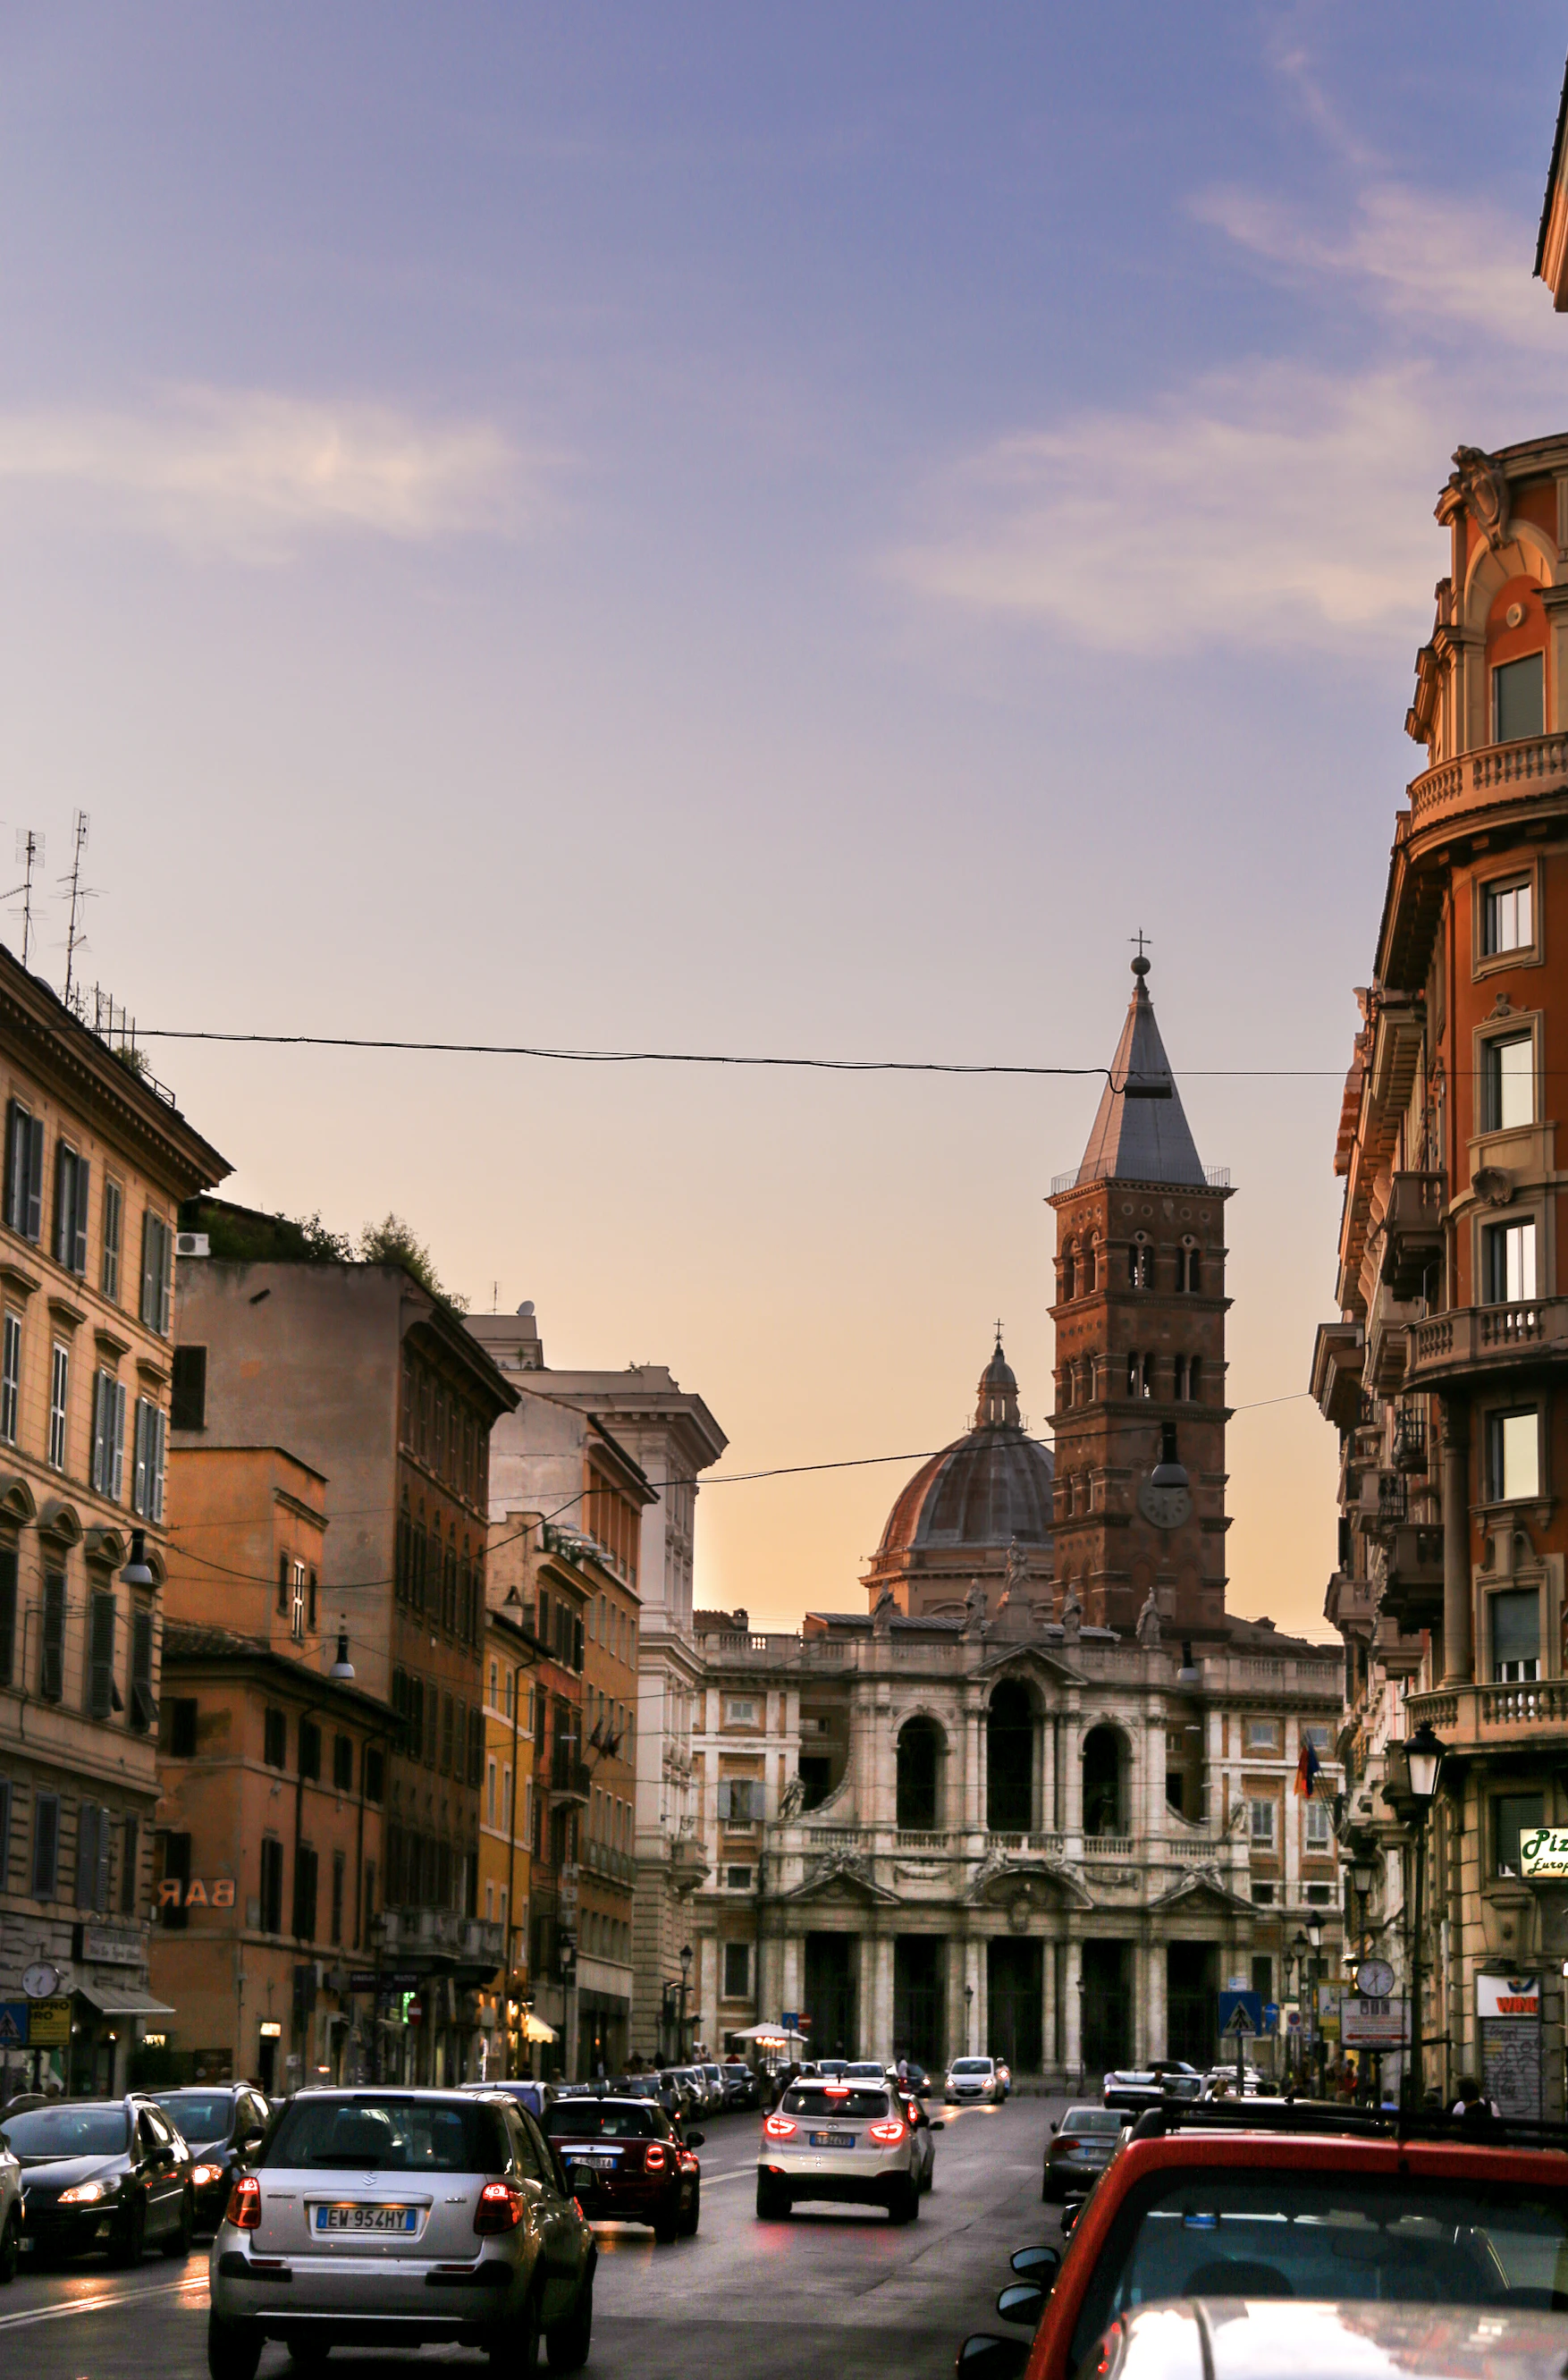 an Italian city street with the sunsetting in the sky.